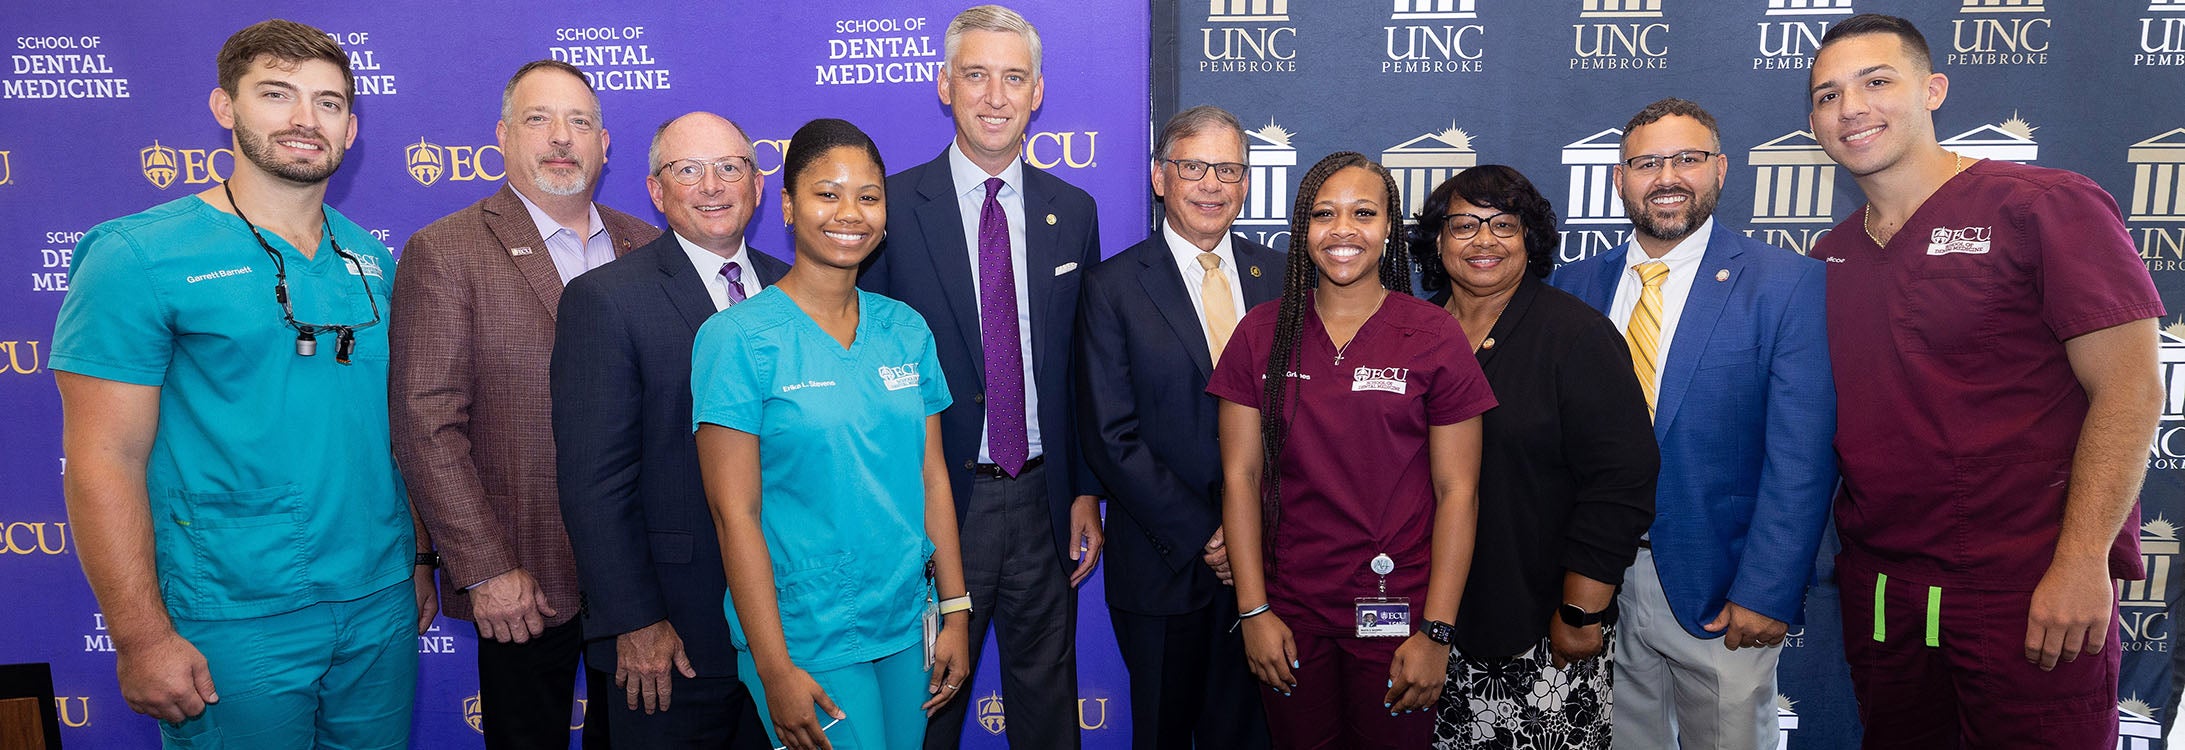 East Carolina University School of Dental Medicine students celebrate alongside state legislators and the chancellors of ECU and the University of North Carolina at Pembroke after the signing of an early assurance agreement creating a pathway to ECU’s dental school for UNCP students.